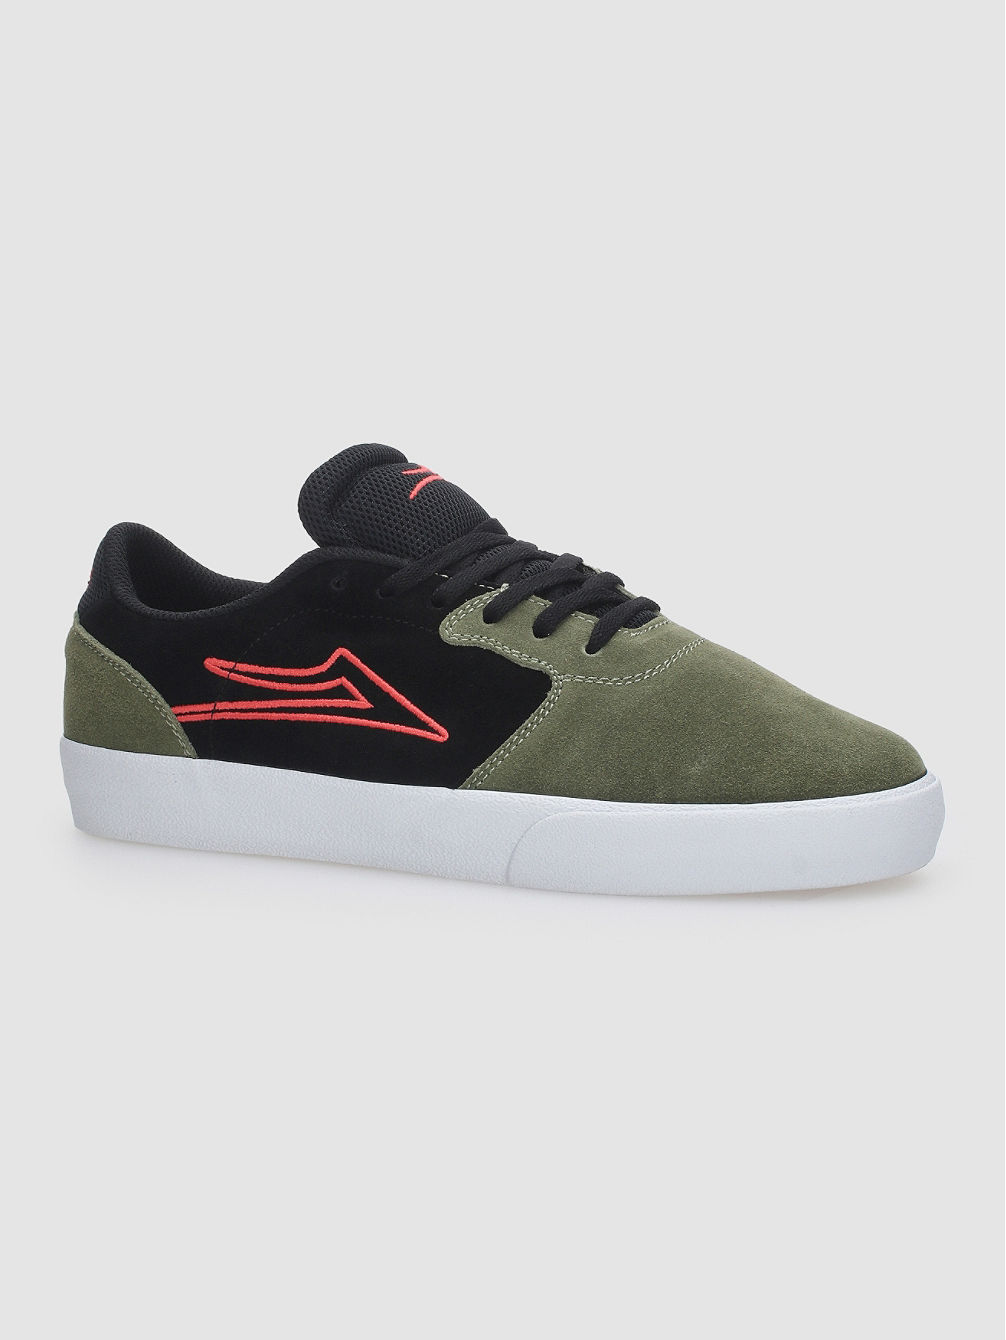 Cardiff Skate Shoes